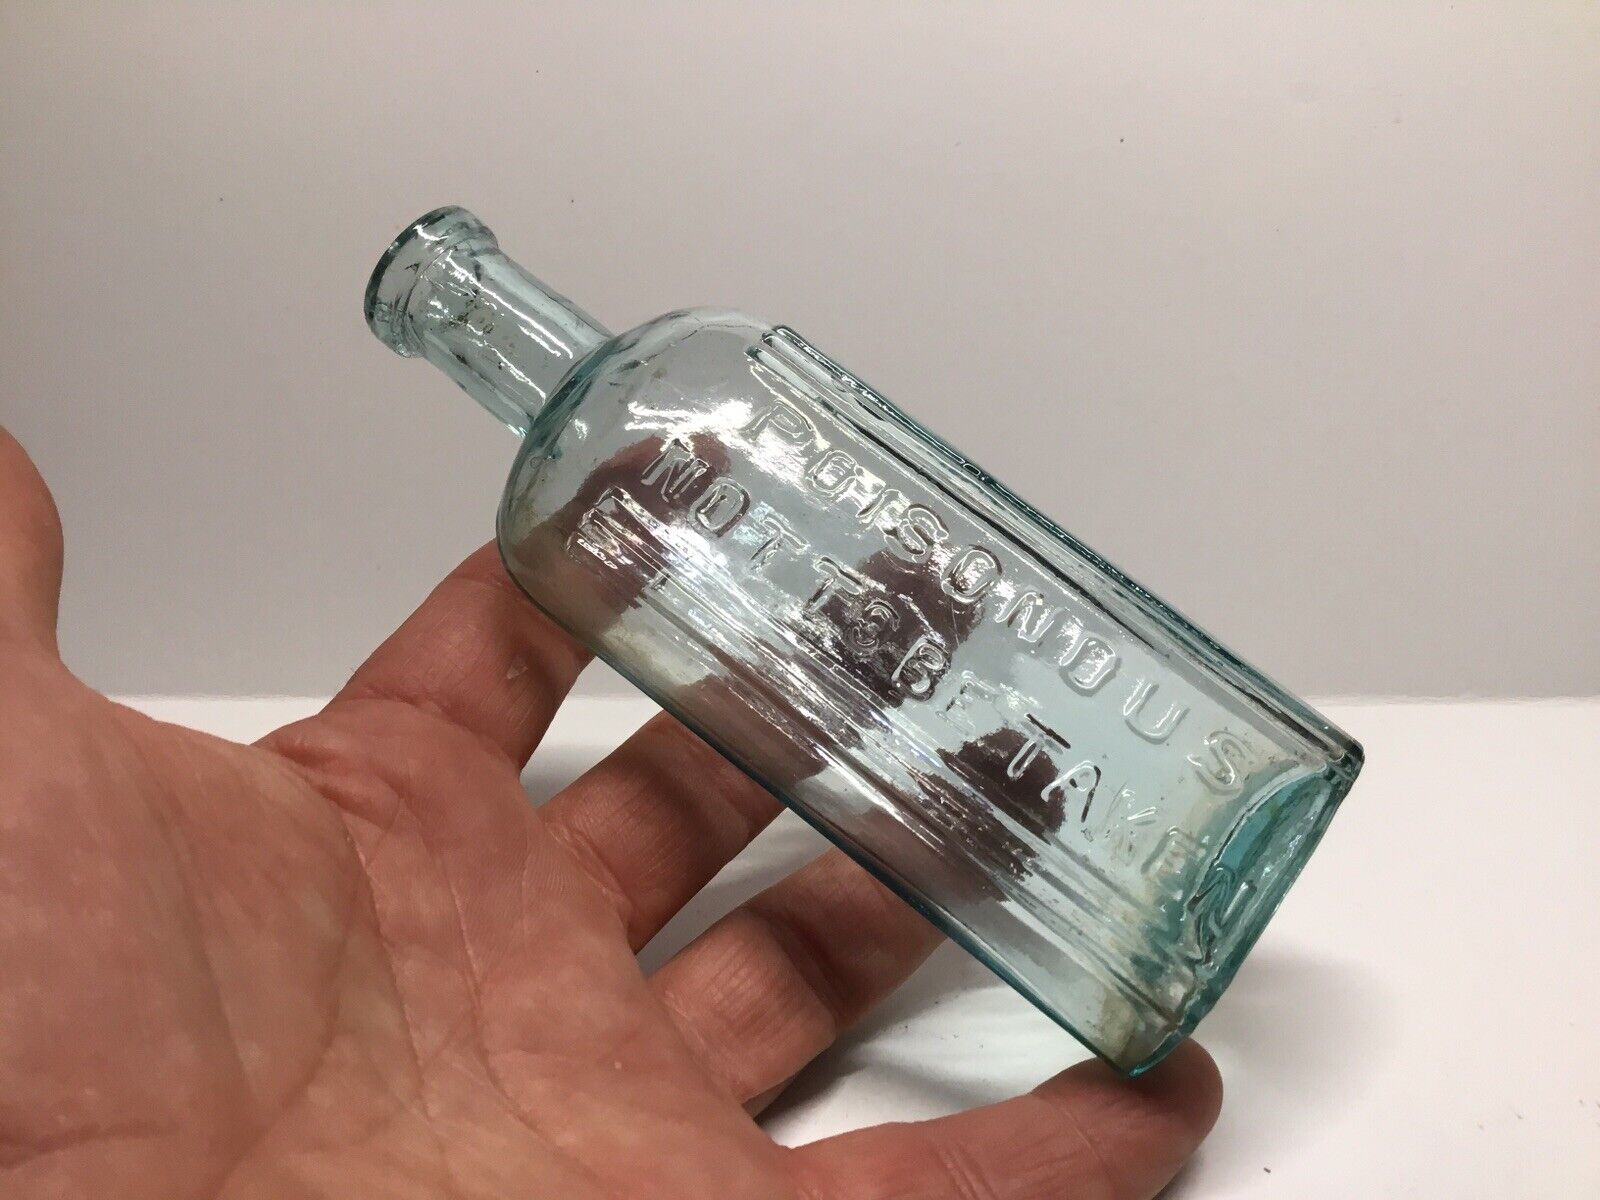 Small Antique Oval Poisonous Not To Be Taken Poison Bottle.